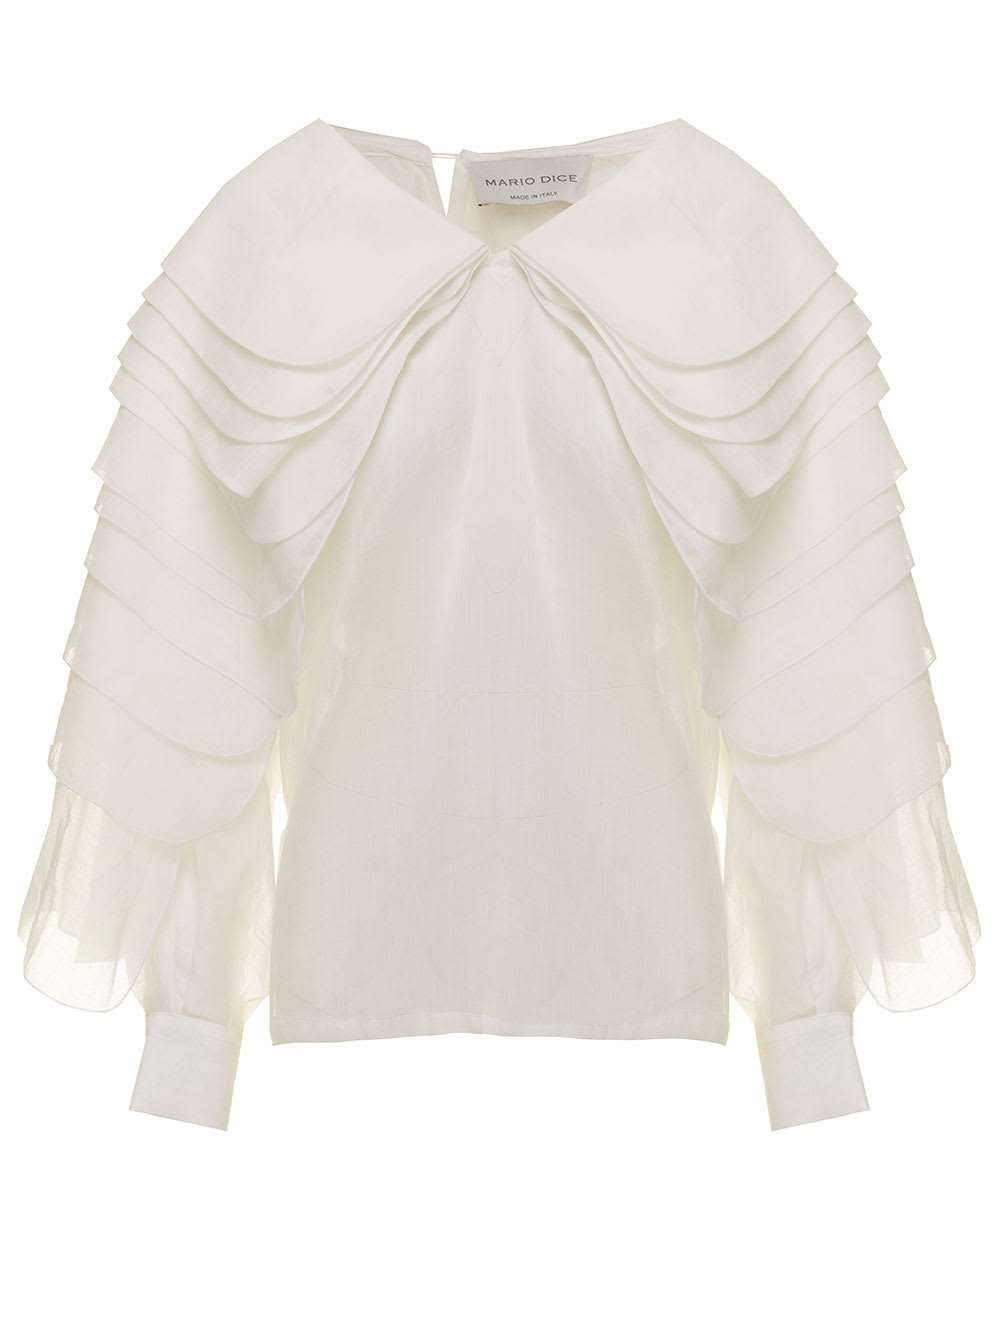 Mario Dice Womans White Ramia Blouse With Layered Sleeves